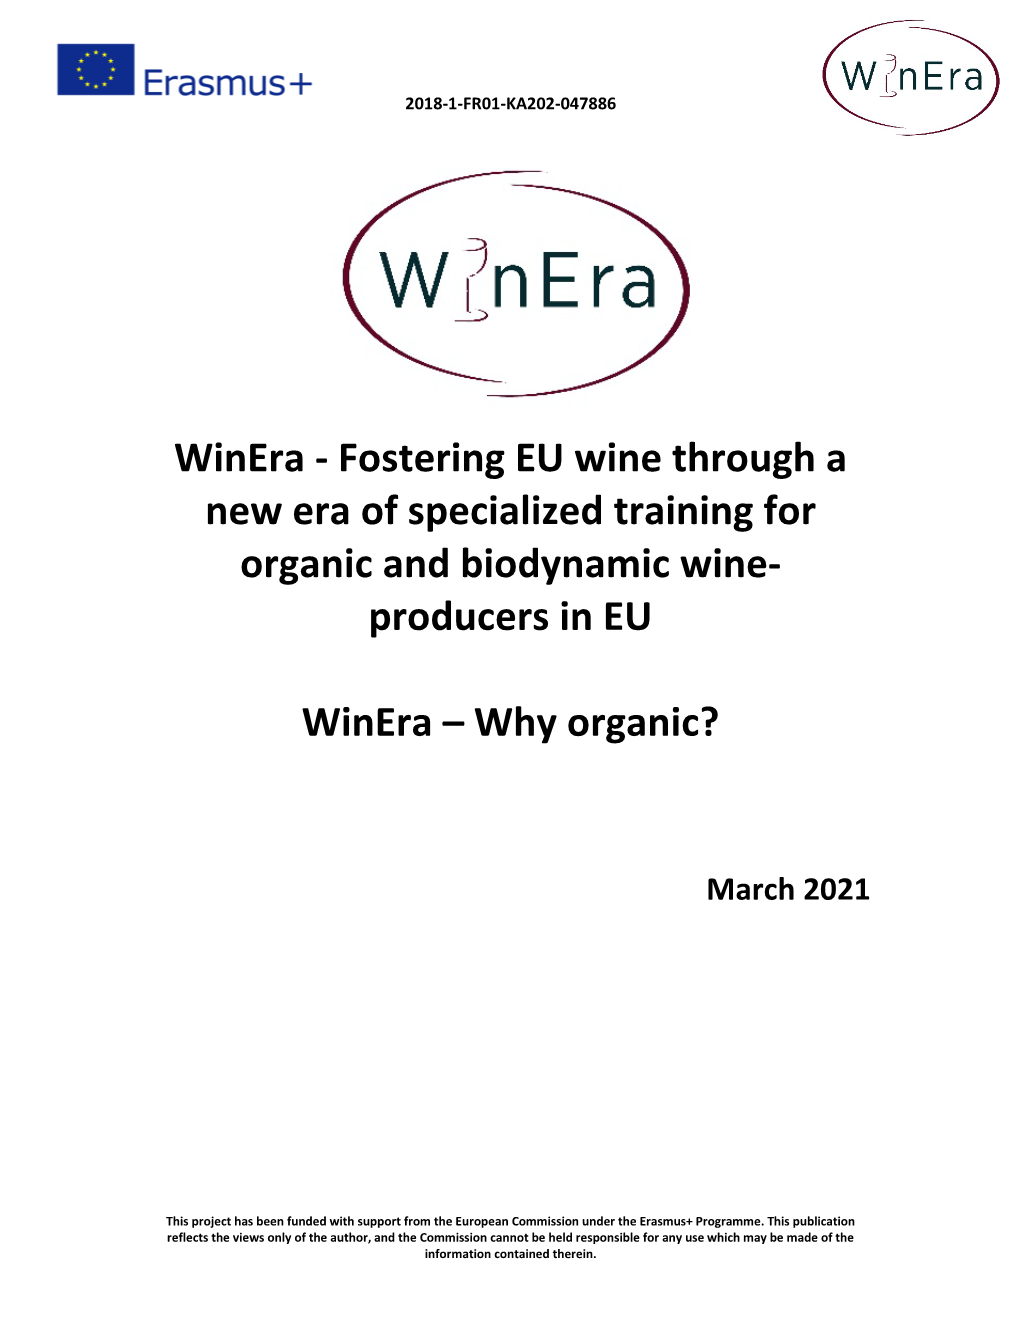 Winera - Fostering EU Wine Through a New Era of Specialized Training for Organic and Biodynamic Wine- Producers in EU